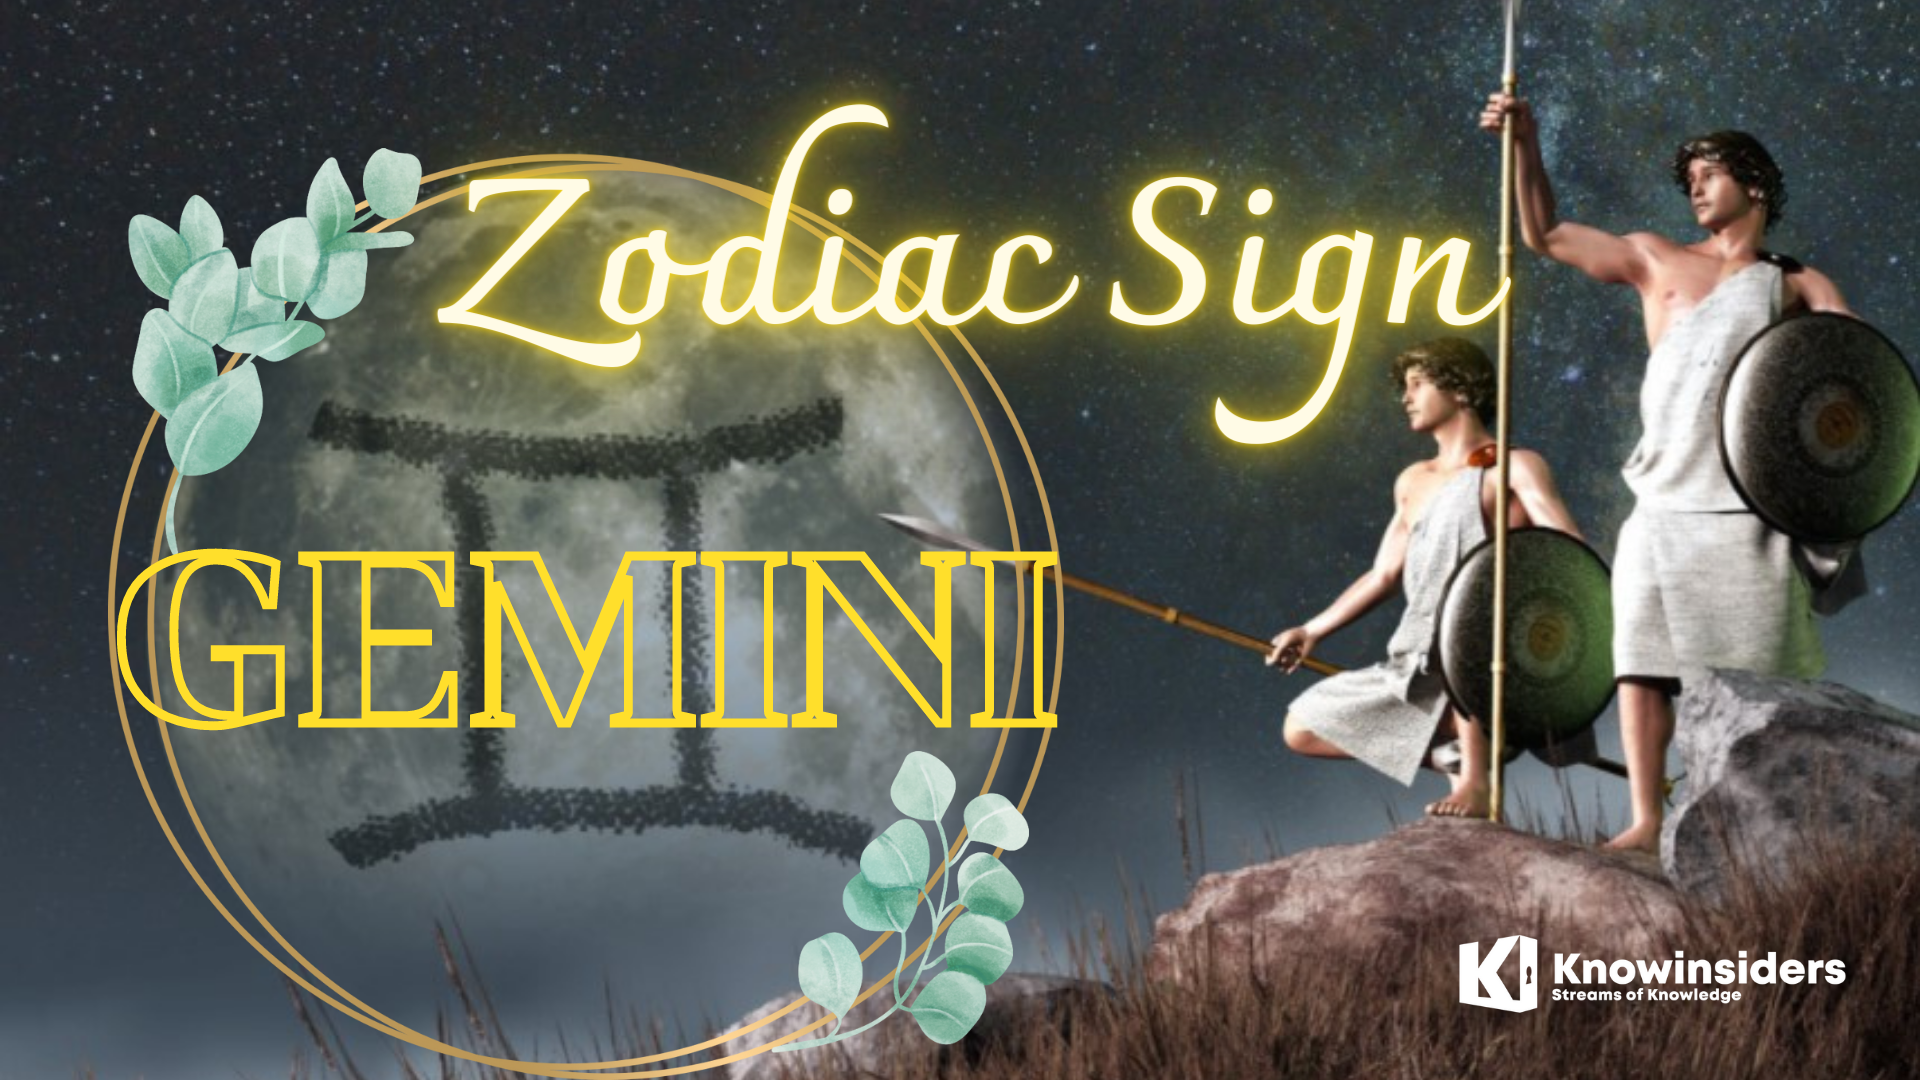 GEMINI March 2022 Horoscope: Monthly Prediction for Love, Career, Money and Health